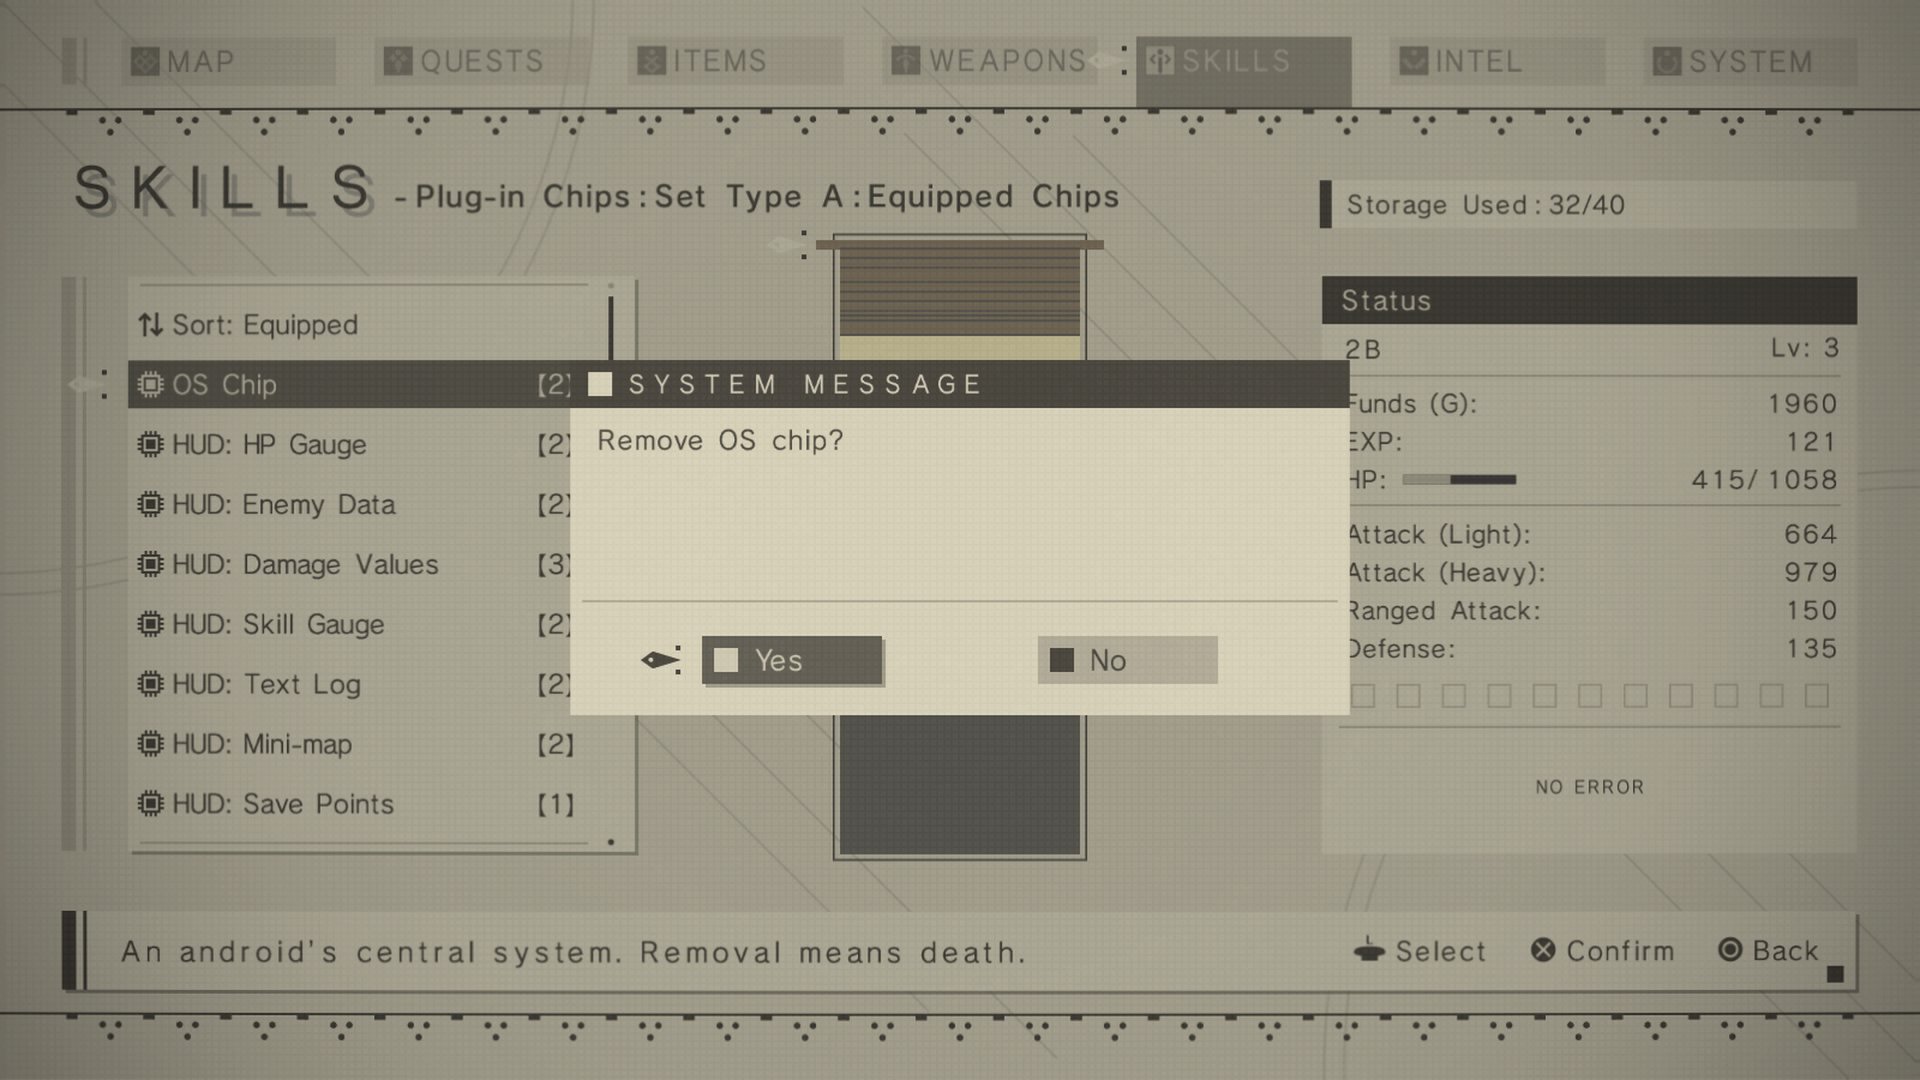 Grommen Installeren Calamiteit Harper Jay on Twitter: "NieR: Automata lets you kill yourself by  unequipping 2B's operating system https://t.co/TP5hT6nJIJ" / Twitter